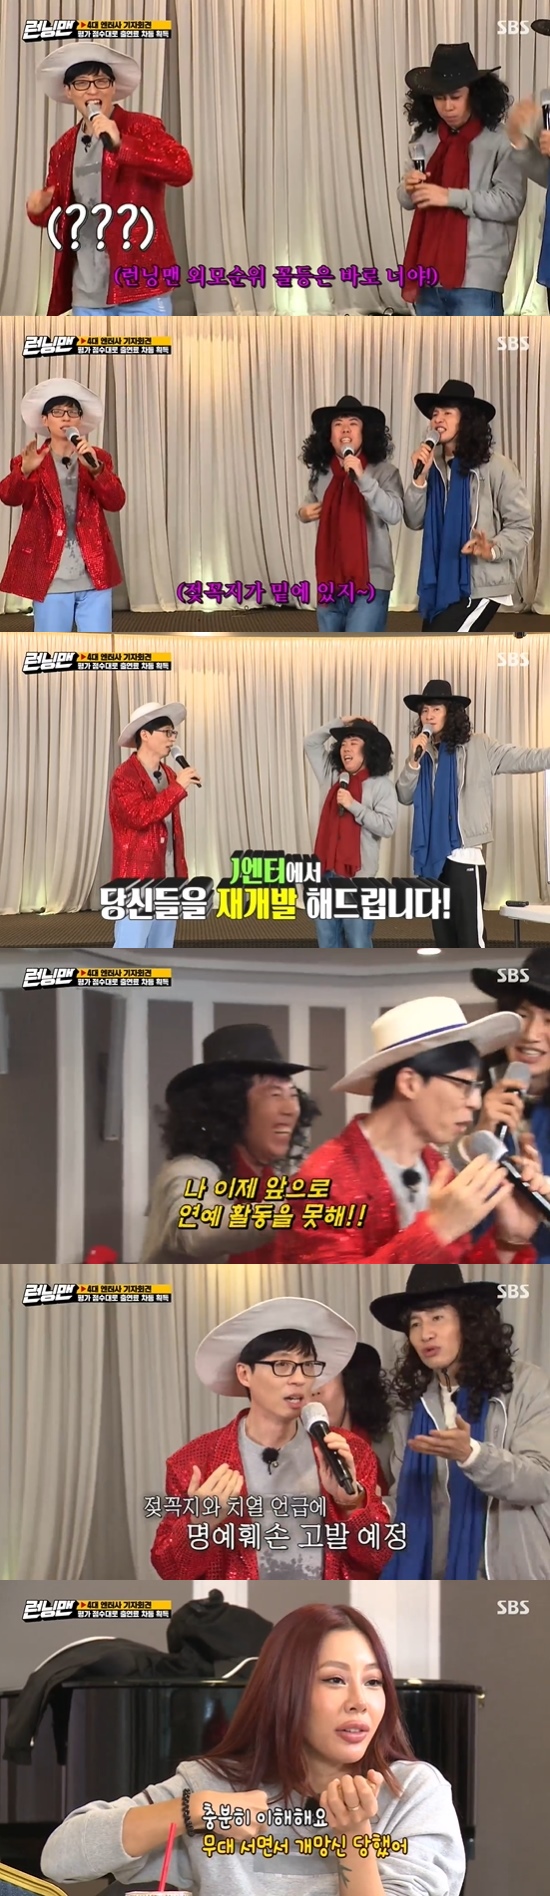 Running Man Yoo Jae-Suk laughed at Yang Se-chan and Lee Kwang-soo Diss songs.On the 28th SBS Good Sunday - Running Man, the contract war race of the stars was held.The four major entertainers of Haha, Jeon So-min, Lee Kwang-soo and Haha regrouped on the day; Haha Enter first started the showcase.Yoo Jae-Suk said, Tell me my terms of contract, and Ill give you here? but Haha said no.Yoo Jae-Suk told only Jessie to stop her ears, and Jessie was shocked, Is not it the same condition as me, more than me?Yoo Jae-Suk, Haha set out to soothe JessieJessie performed a new song stage; Yang Se-chan drove Lee Kwang-soo is choreographed aid; you copied, and Jessie said, Did I do this?Will Cyay make me do that? The following is the showtime of Yoo Jae-Suk. Kim Jong Kook said, I know you are not talented, and Ji Suk-jin also said, It is not a vocal imitation.Then Yoo Jae-Suk said, It becomes a helicopter. He immediately imitated a helicopter vocal cord and started a three-way poem under his name.When the response was not good, Yoo Jae-Suk tried to resuscitate the cardiopulmonary resuscitation, saying he would add a sage pool.However, the members laughed when they saw the nervous Yoo Jae-Suk and said, What is the wit to shake Mike?The Gwangsu Ent came forward, Lee Kwang-soo and Yang Se-chan said they would pay the event pay and send a miscarriage.Yoo Jae-Suk said, Live, AR prices are different. He decided to receive 30,000 won, but then tried to negotiate again, saying, Is it in the video?Ji Suk-jin then said, I can do it.In the end, Yoo Jae-Suk compromised for 40,000 won and started to call for redevelopment of love saying I do not do well in the heritage broadcast.Yang Se-chan, Lee Kwang-soo did a Diss, referring to the look of Yoo Jae-Suk next to him, while Yoo Jae-Suk stopped singing with a laugh.Yoo Jae-Suk said, Prepare the suit. Give me a shit in front of the audience? I cant play anymore. Ive been feeling bad since my teeth.Jessie laughed, empathizing with I understand enough, I was disgraced as I stood on stage.Photo = SBS Broadcasting Screen